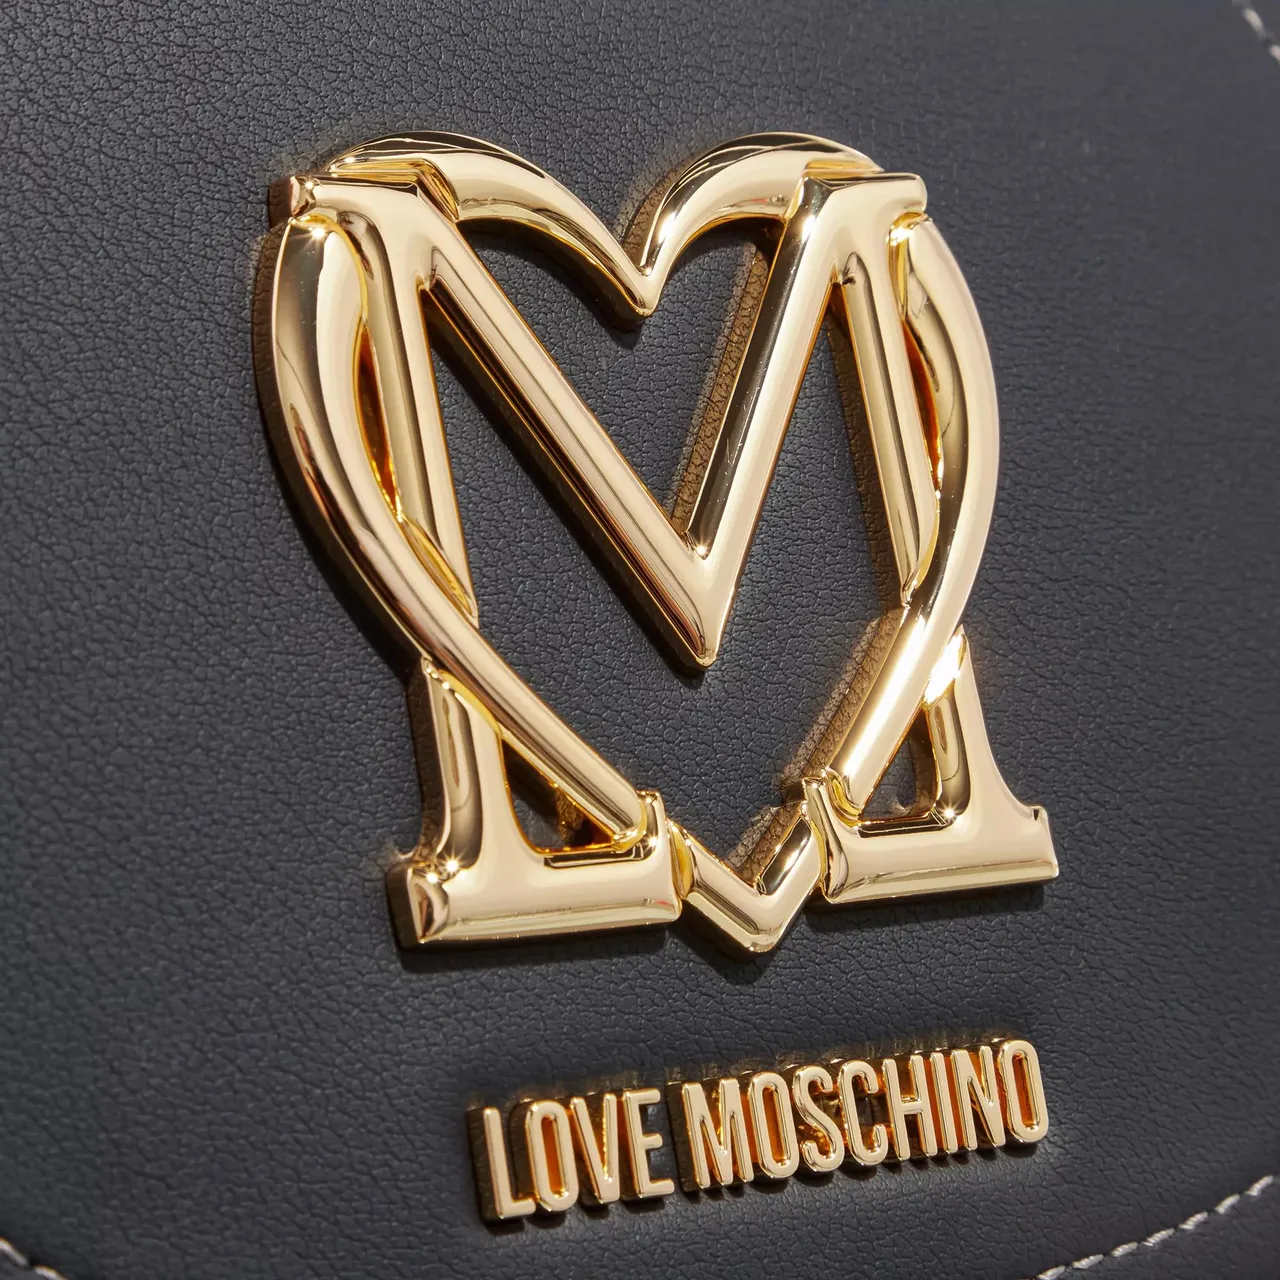 Love Moschino Crossbody Bags - Super Gold - black - Crossbody Bags for ladies